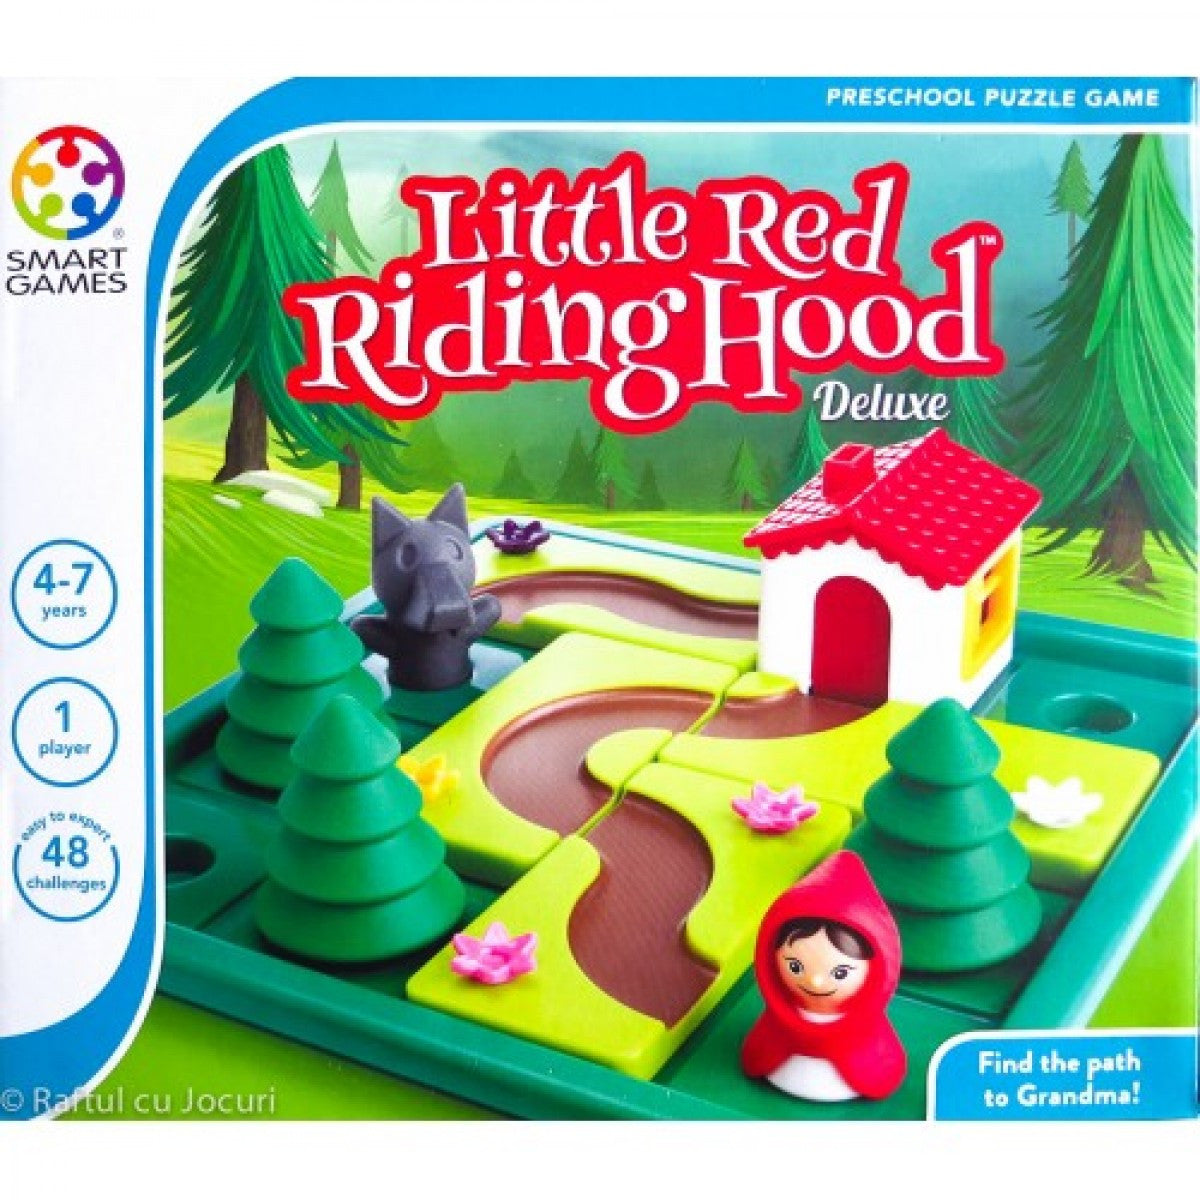 SMART GAMES - Little Red Riding Hood - Logic Puzzle - Single Player